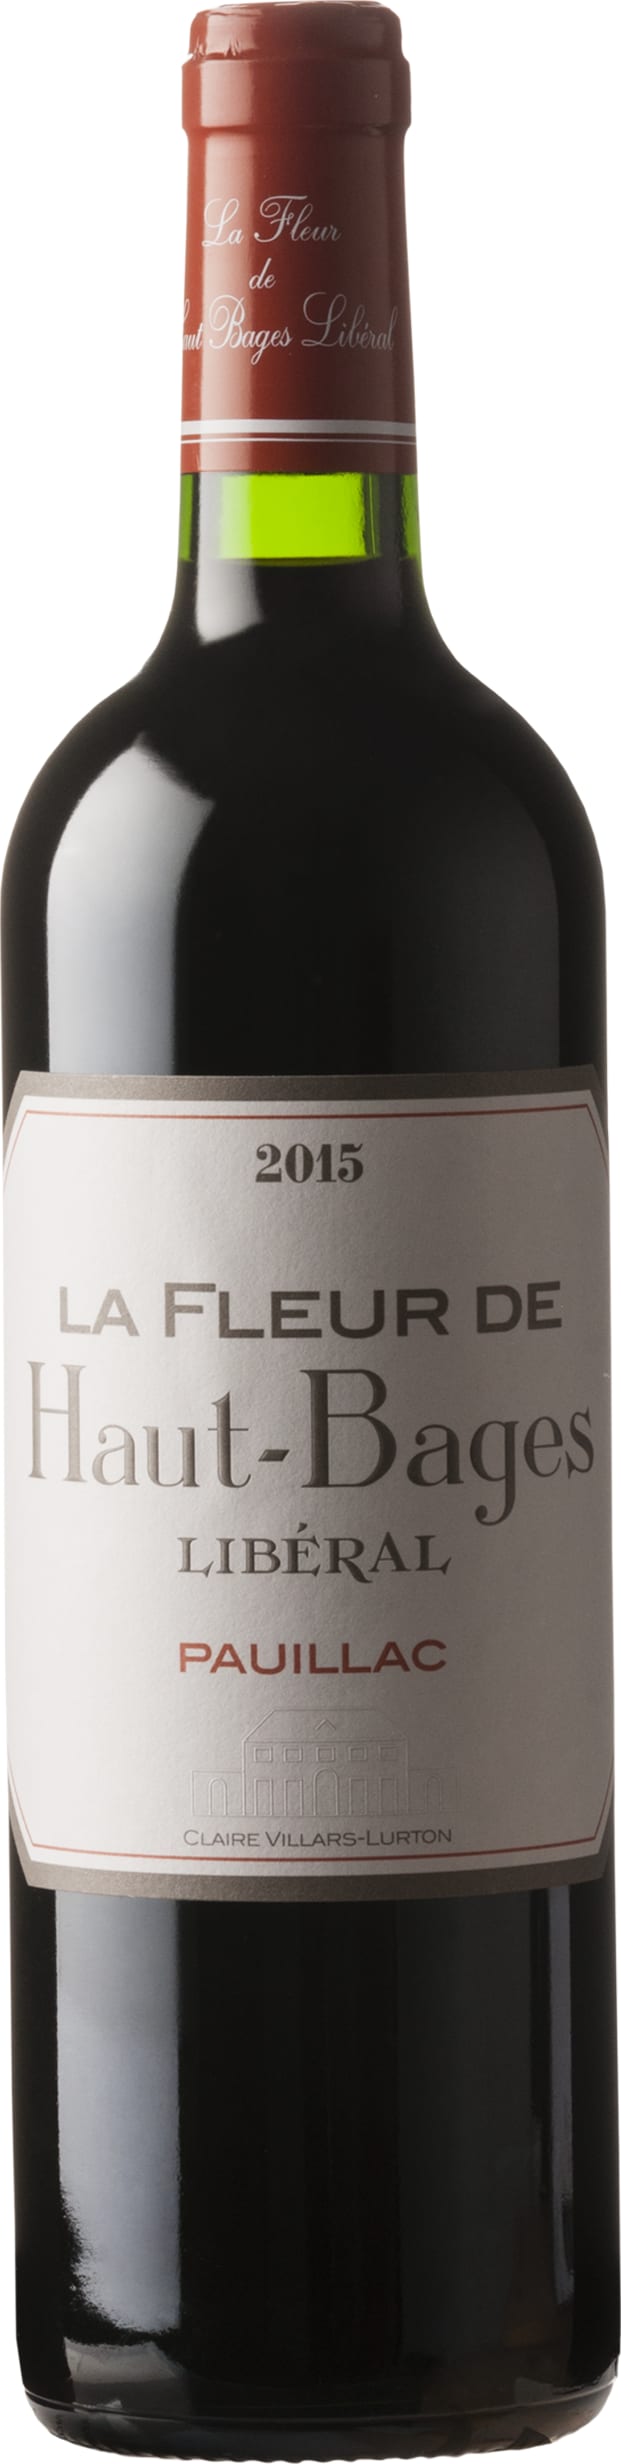 Chateau Haut-Bages Liberal Pauillac, La Fleur de Haut-Bages Liberal 2016 75cl - Buy Chateau Haut-Bages Liberal Wines from GREAT WINES DIRECT wine shop